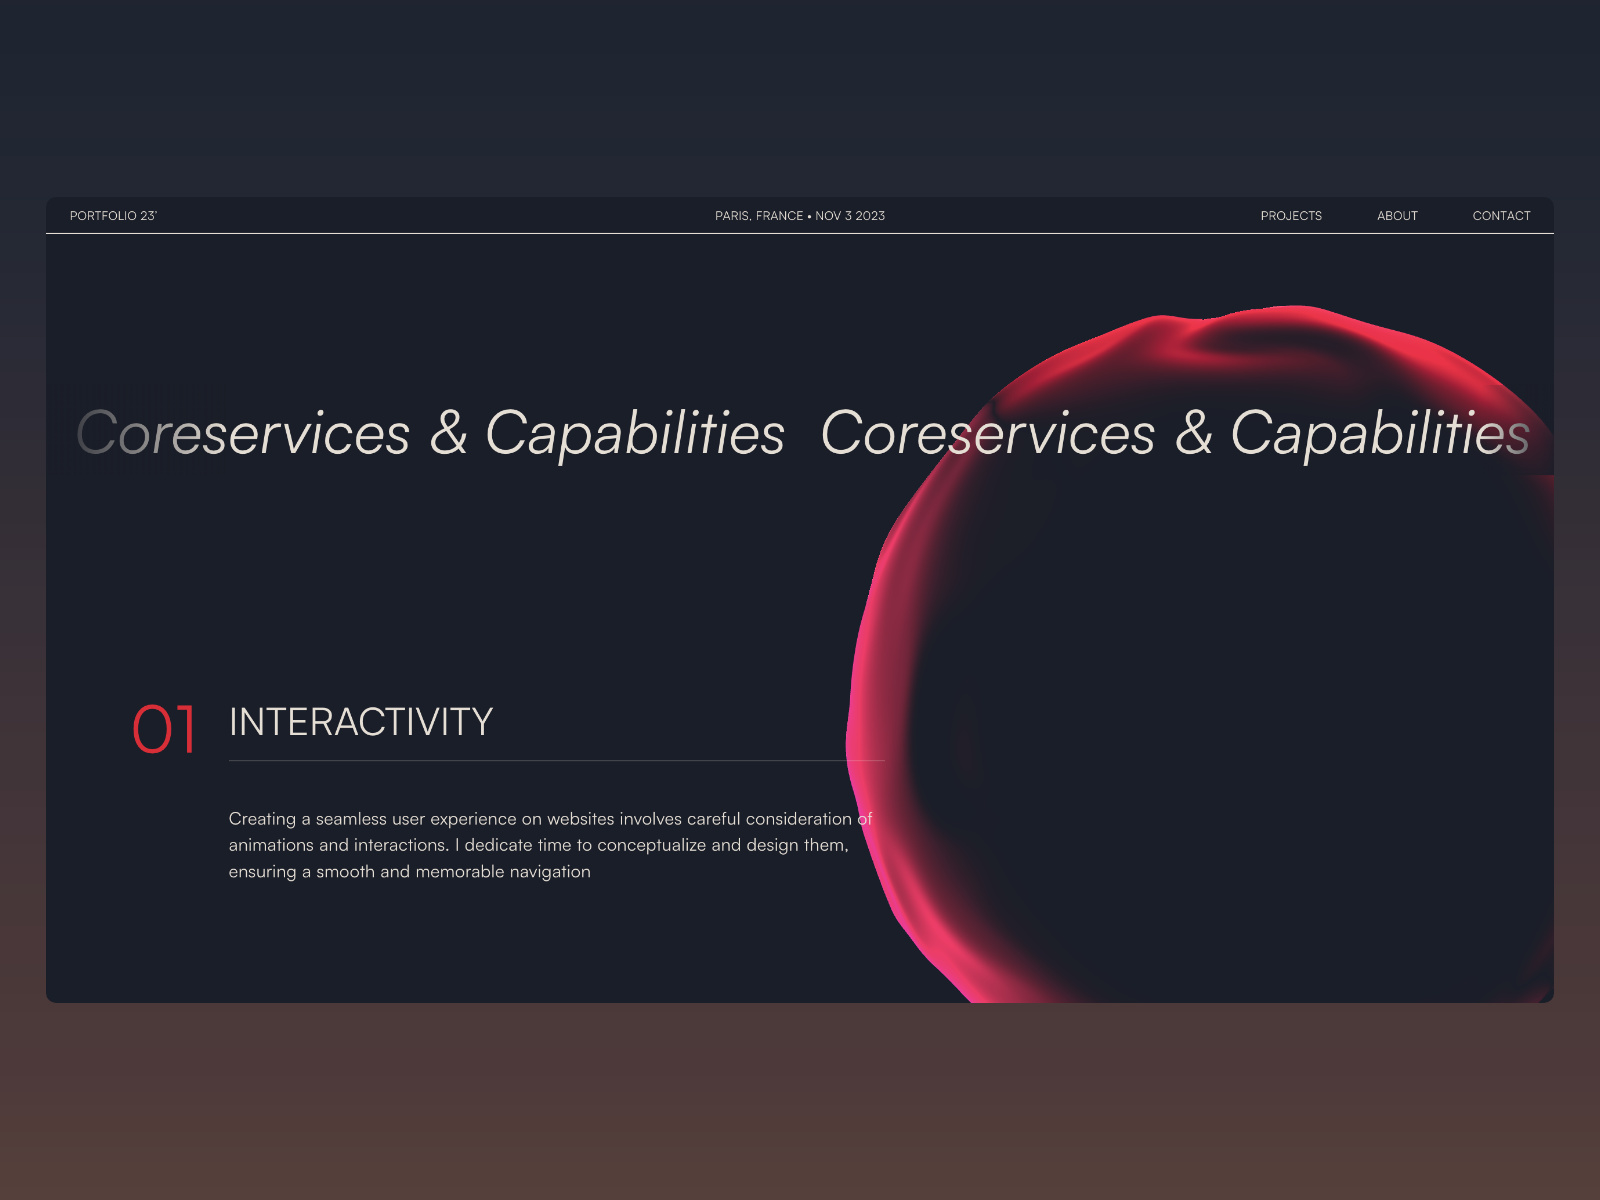 Coreservices and capabilities